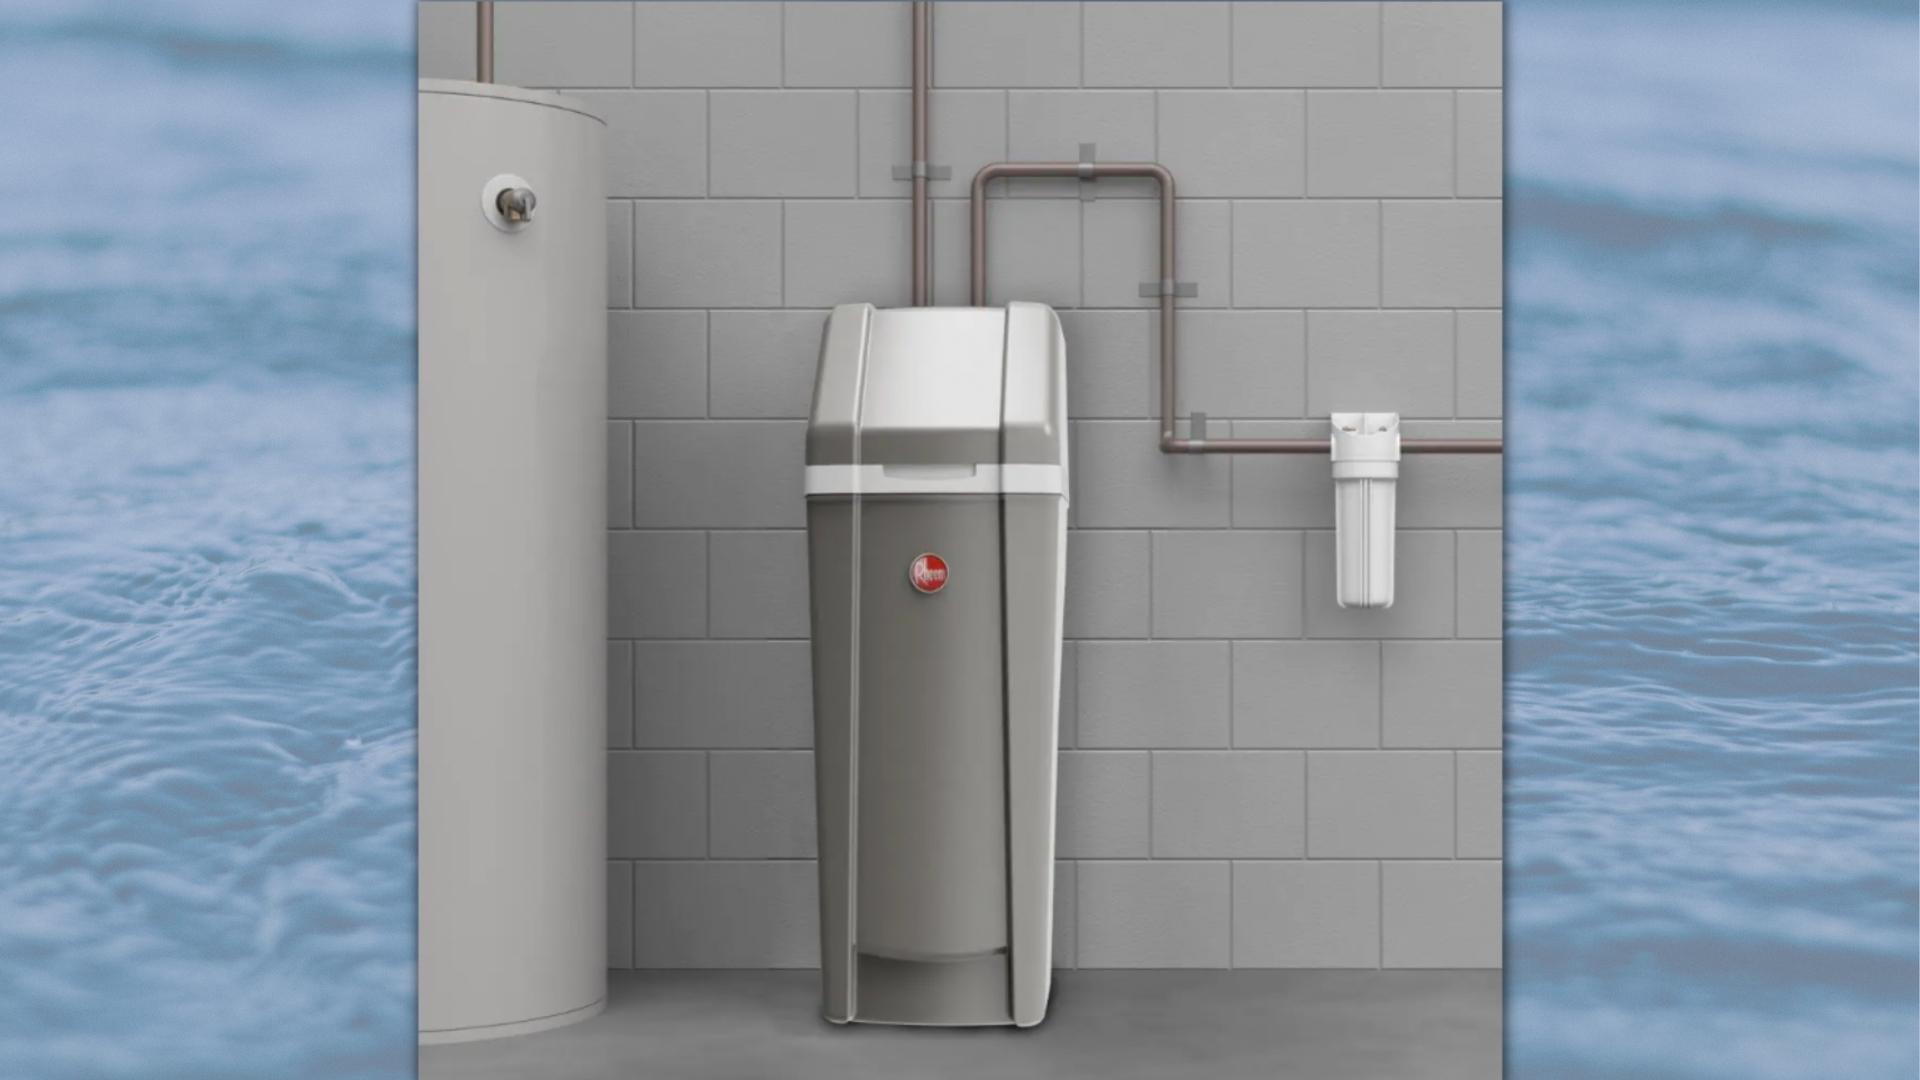 Rheem Water Softener Completes Your Smart Home